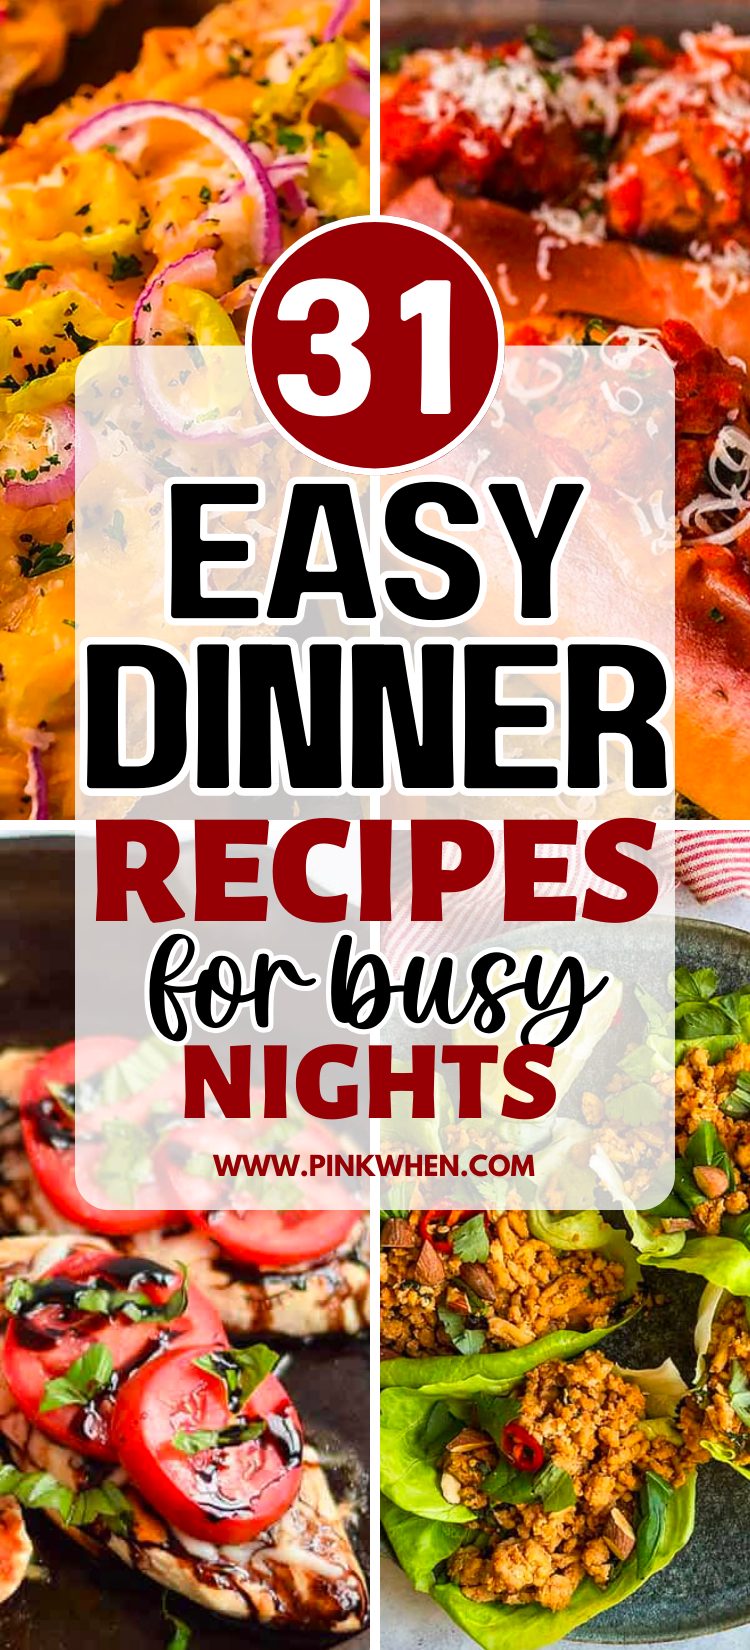 31 Easy Dinner Recipes for Busy Nights